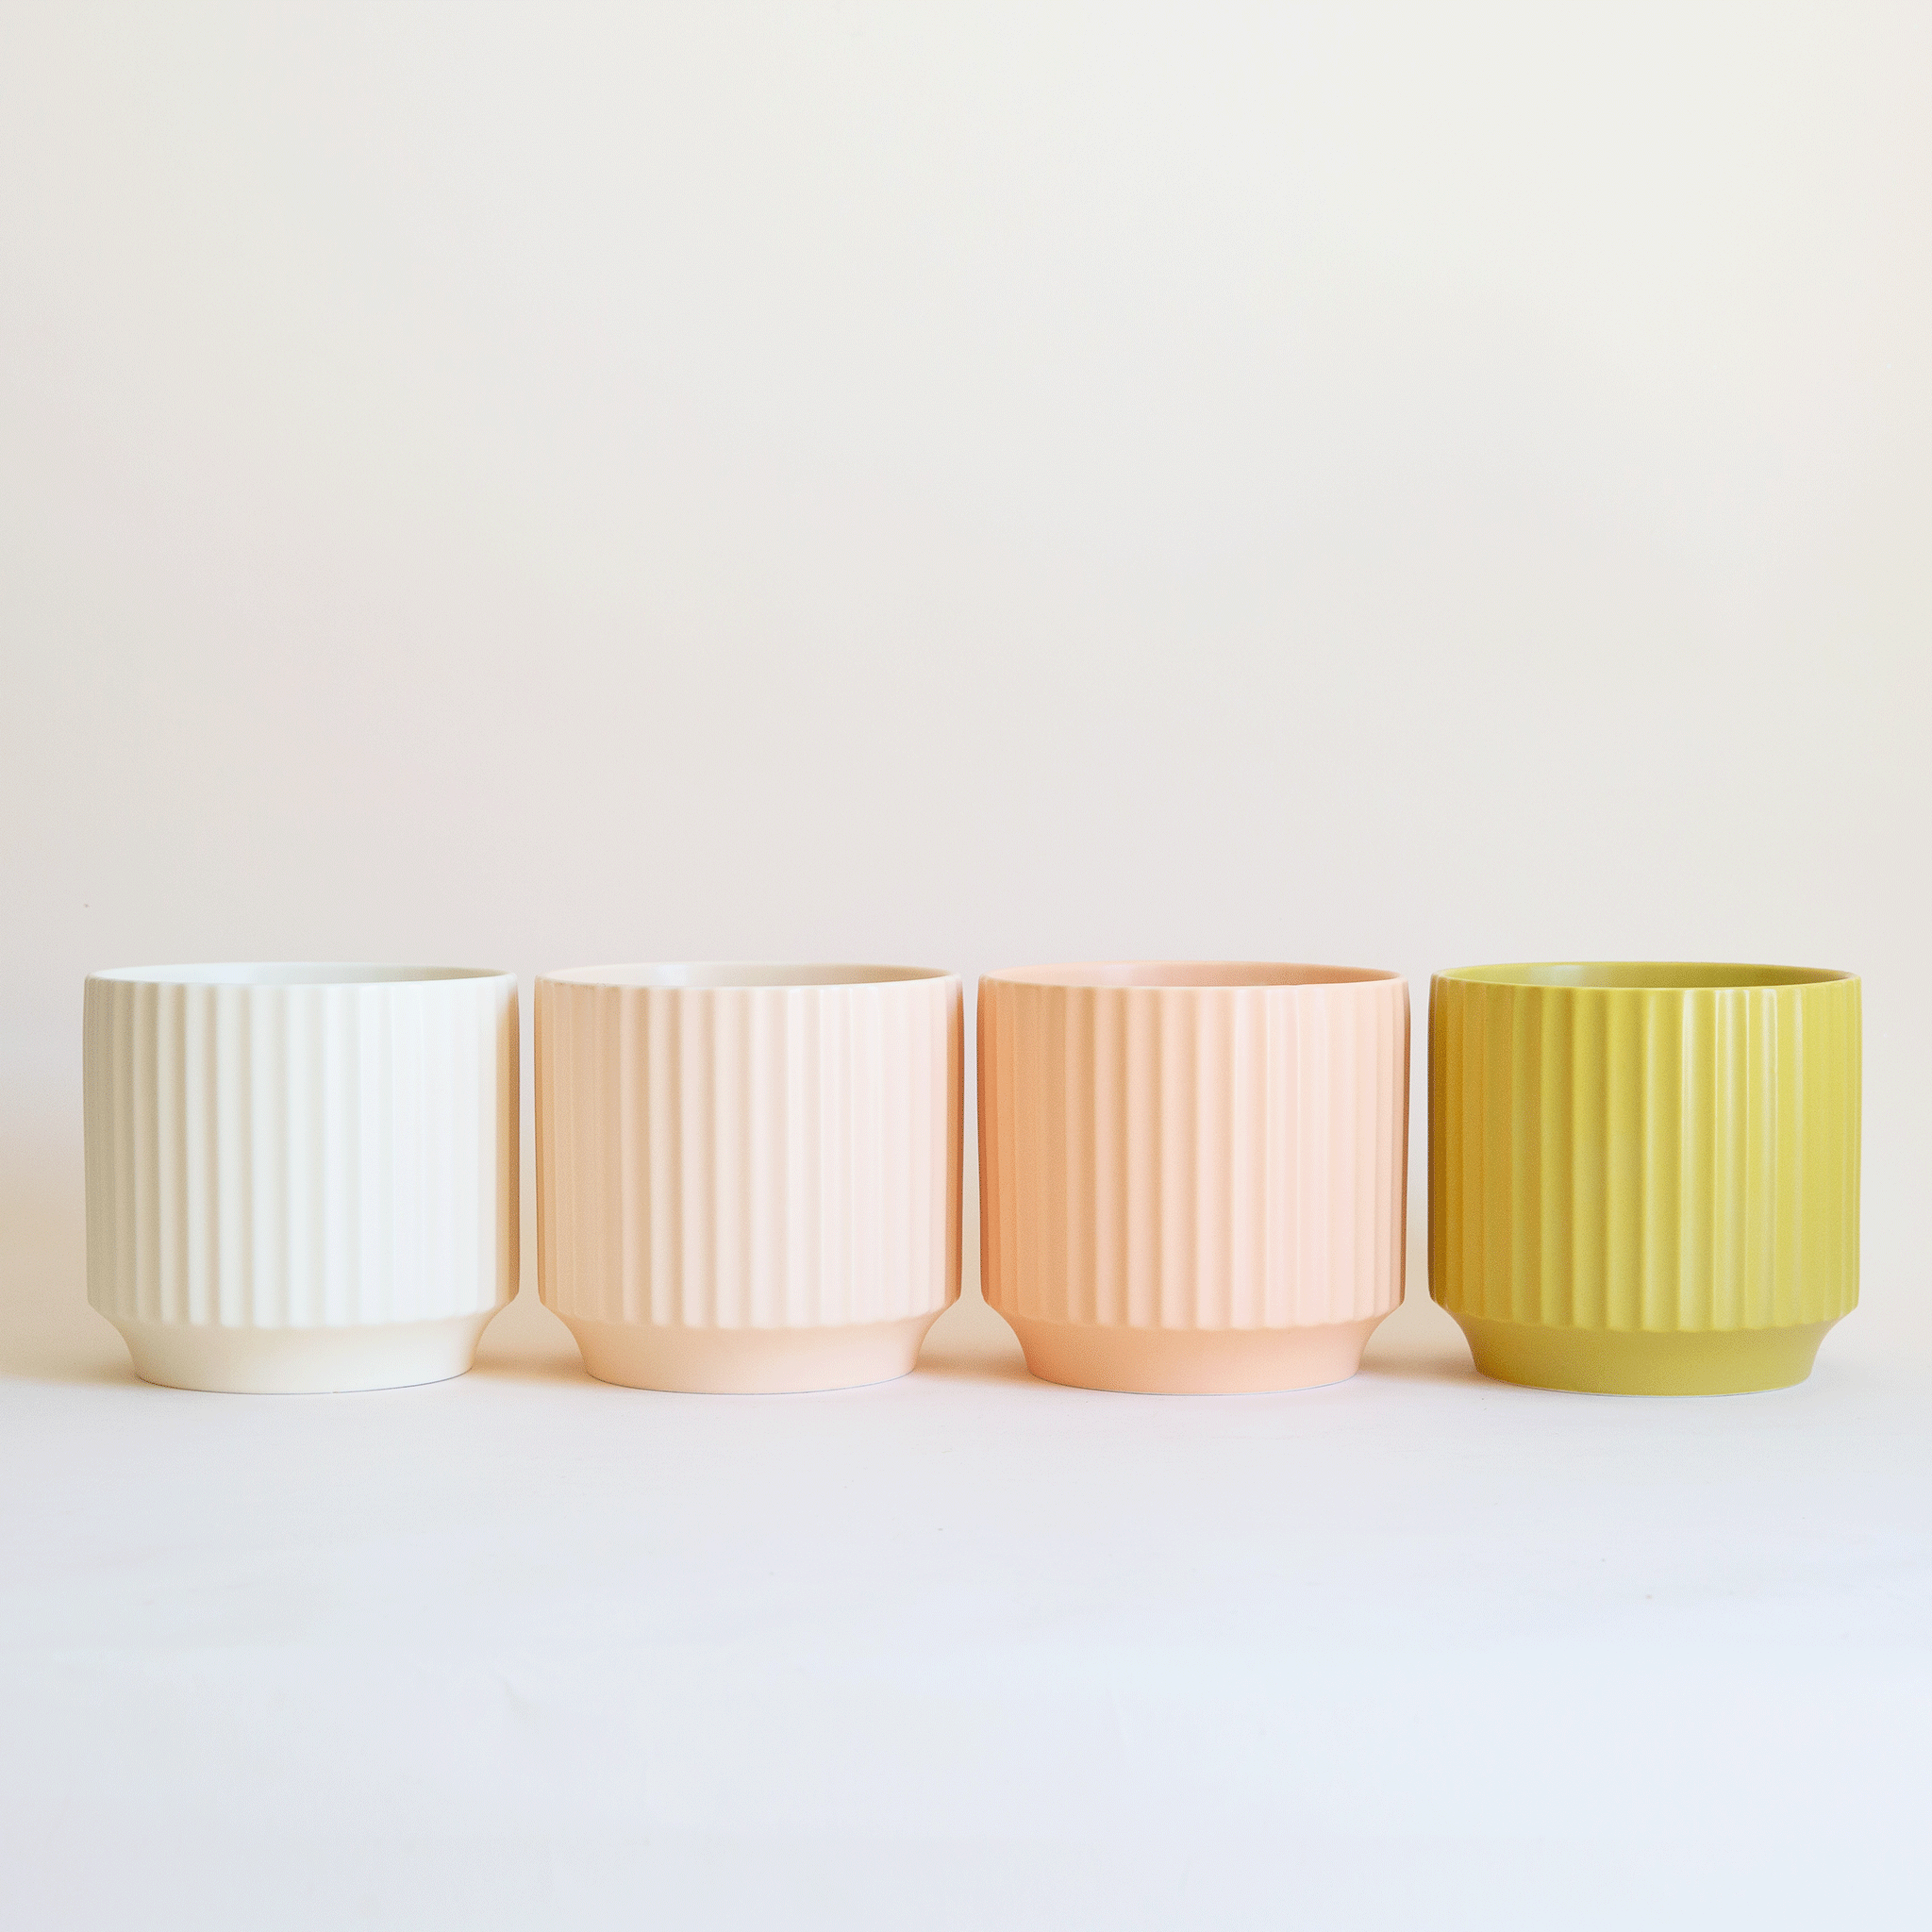 On a white background is four ceramic planters in four shades ranging from ivory to pinks to chartreuse.